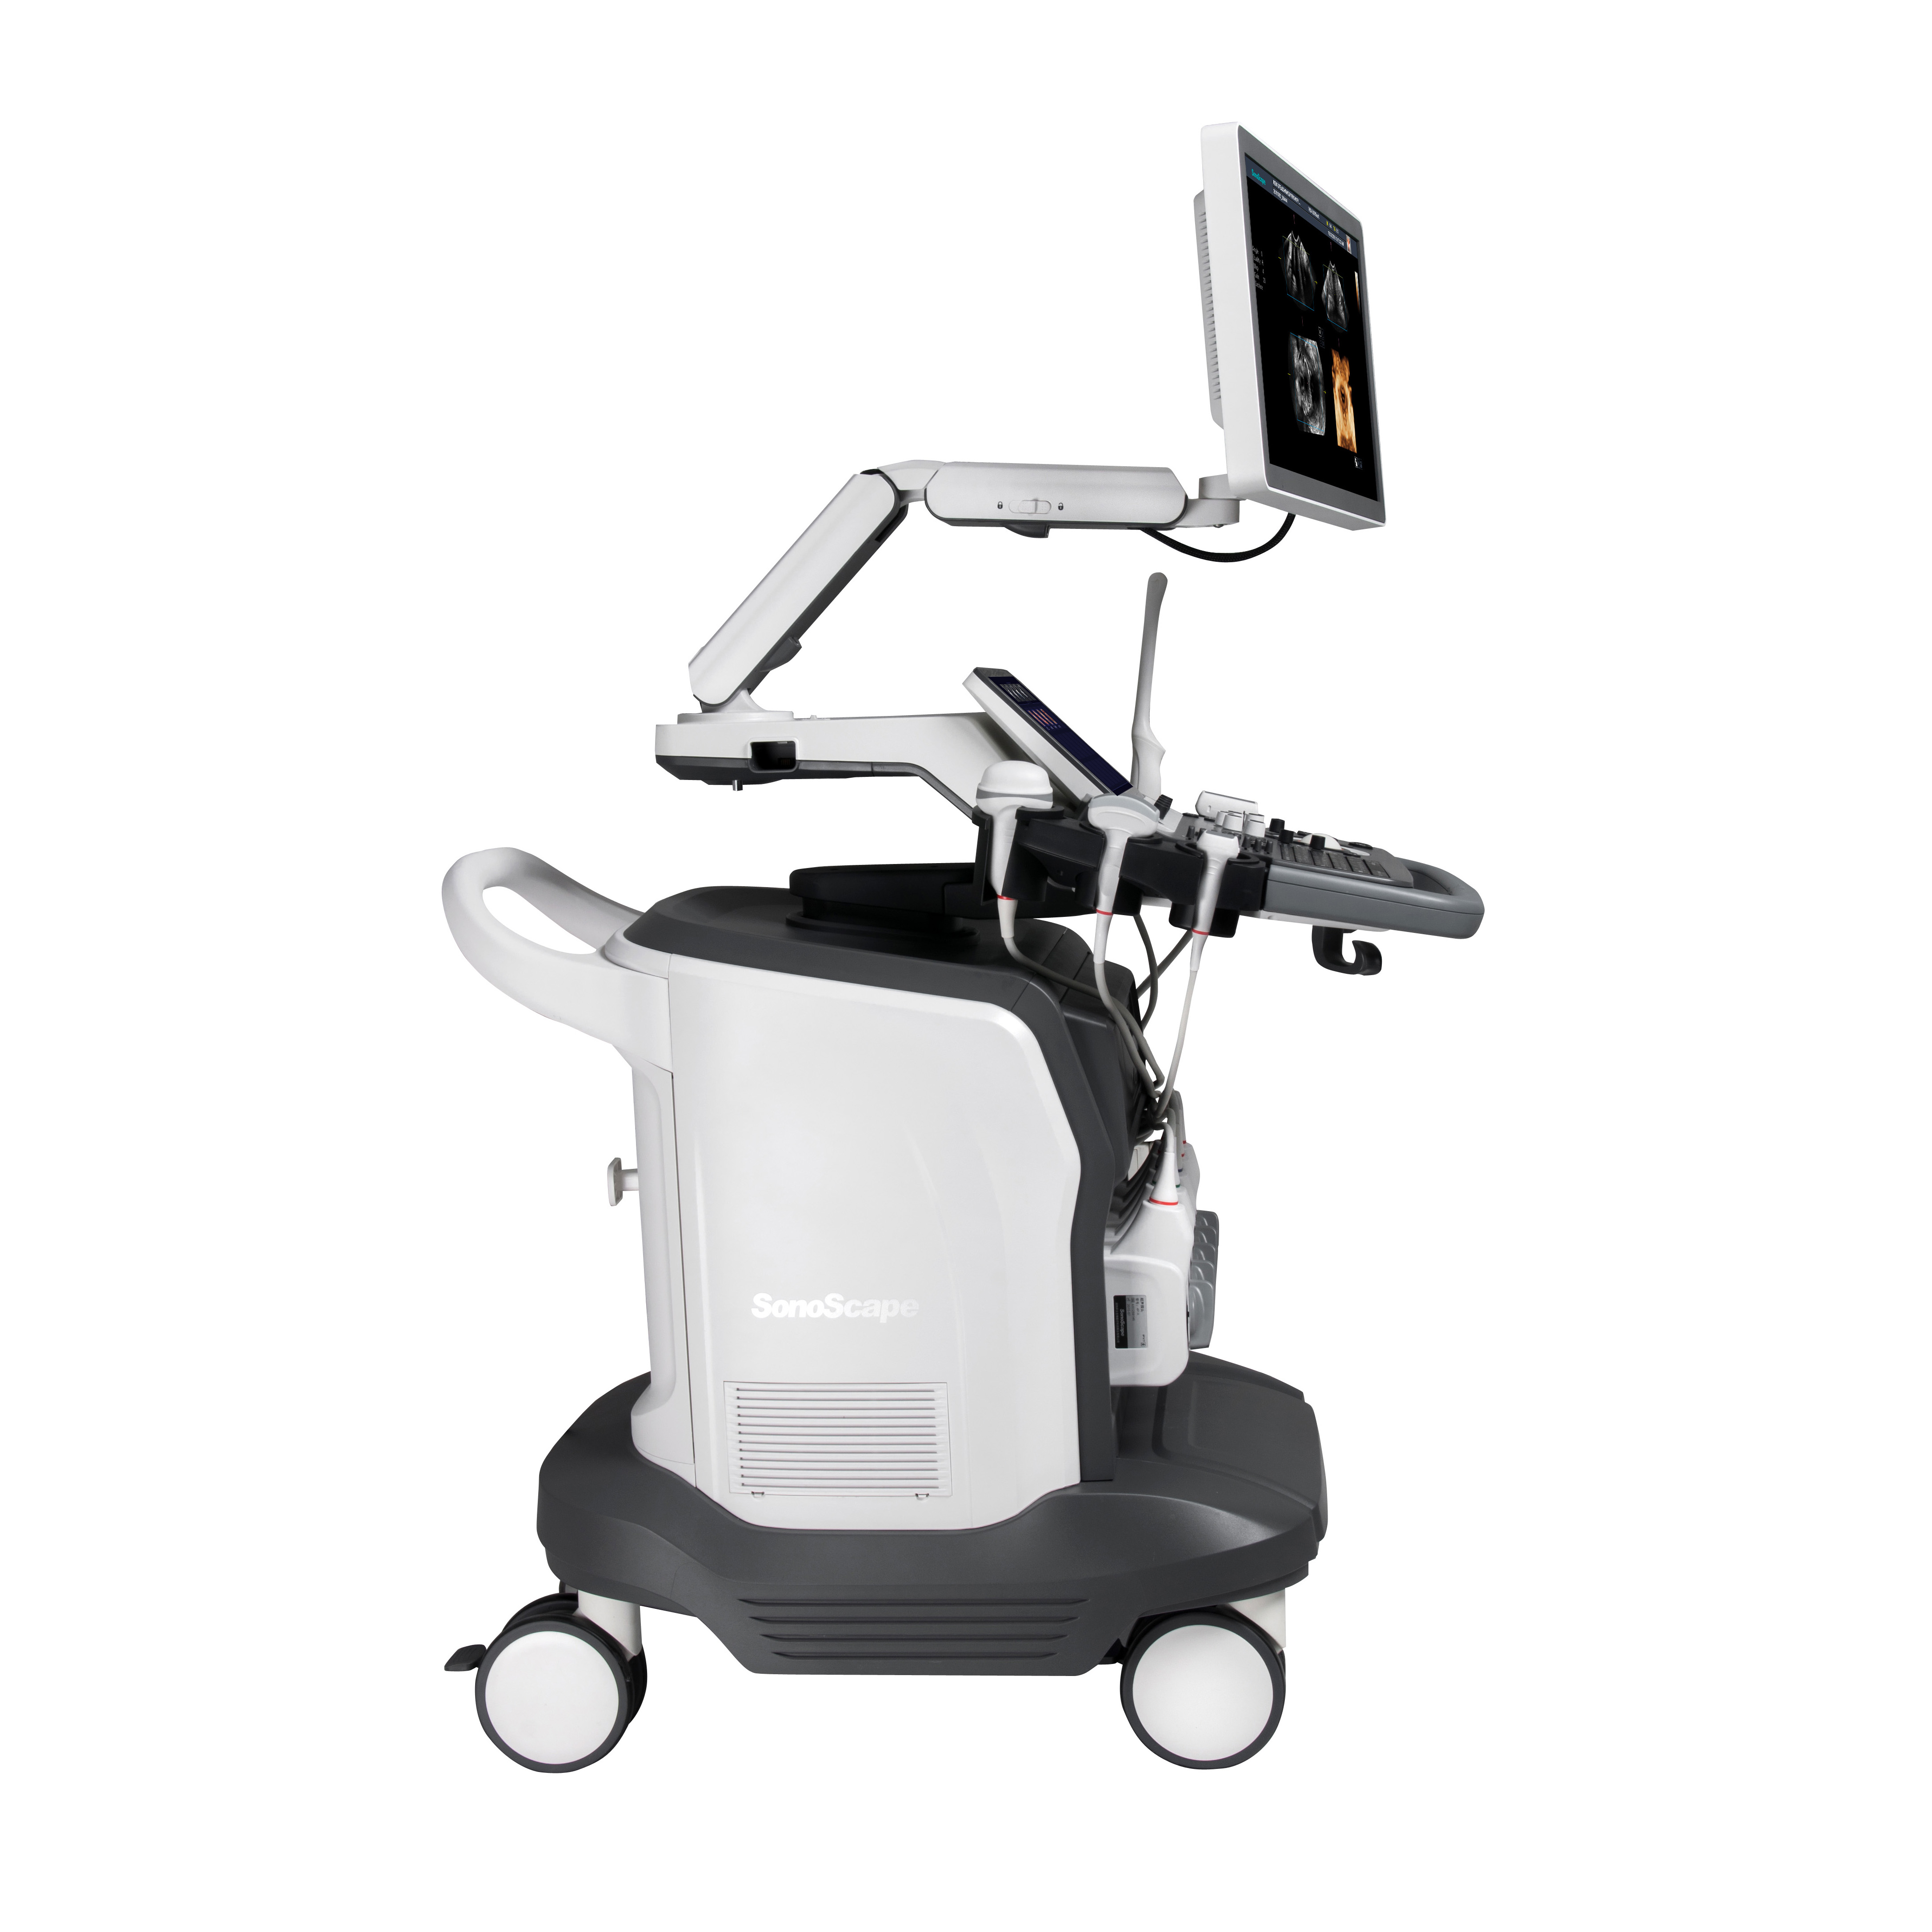 SonoScape S50 Elite New Arrival 3D/4D/5D Height Adjustable Trolley Ultrasound Instrument For Ultrasonic Diagnosis